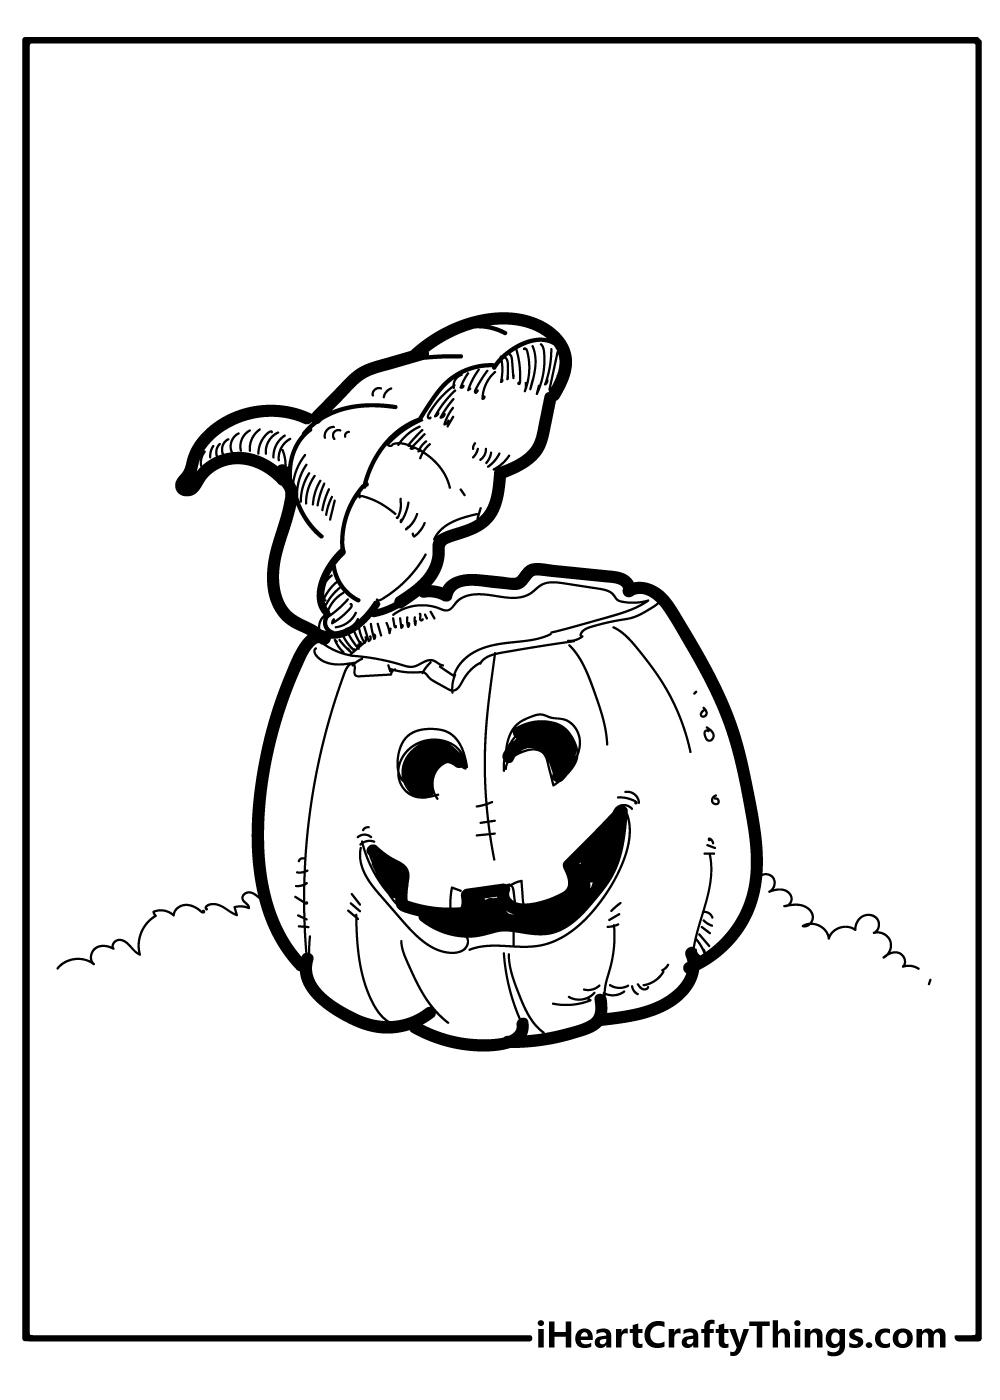 Pumpkin Coloring Pages free download for kids